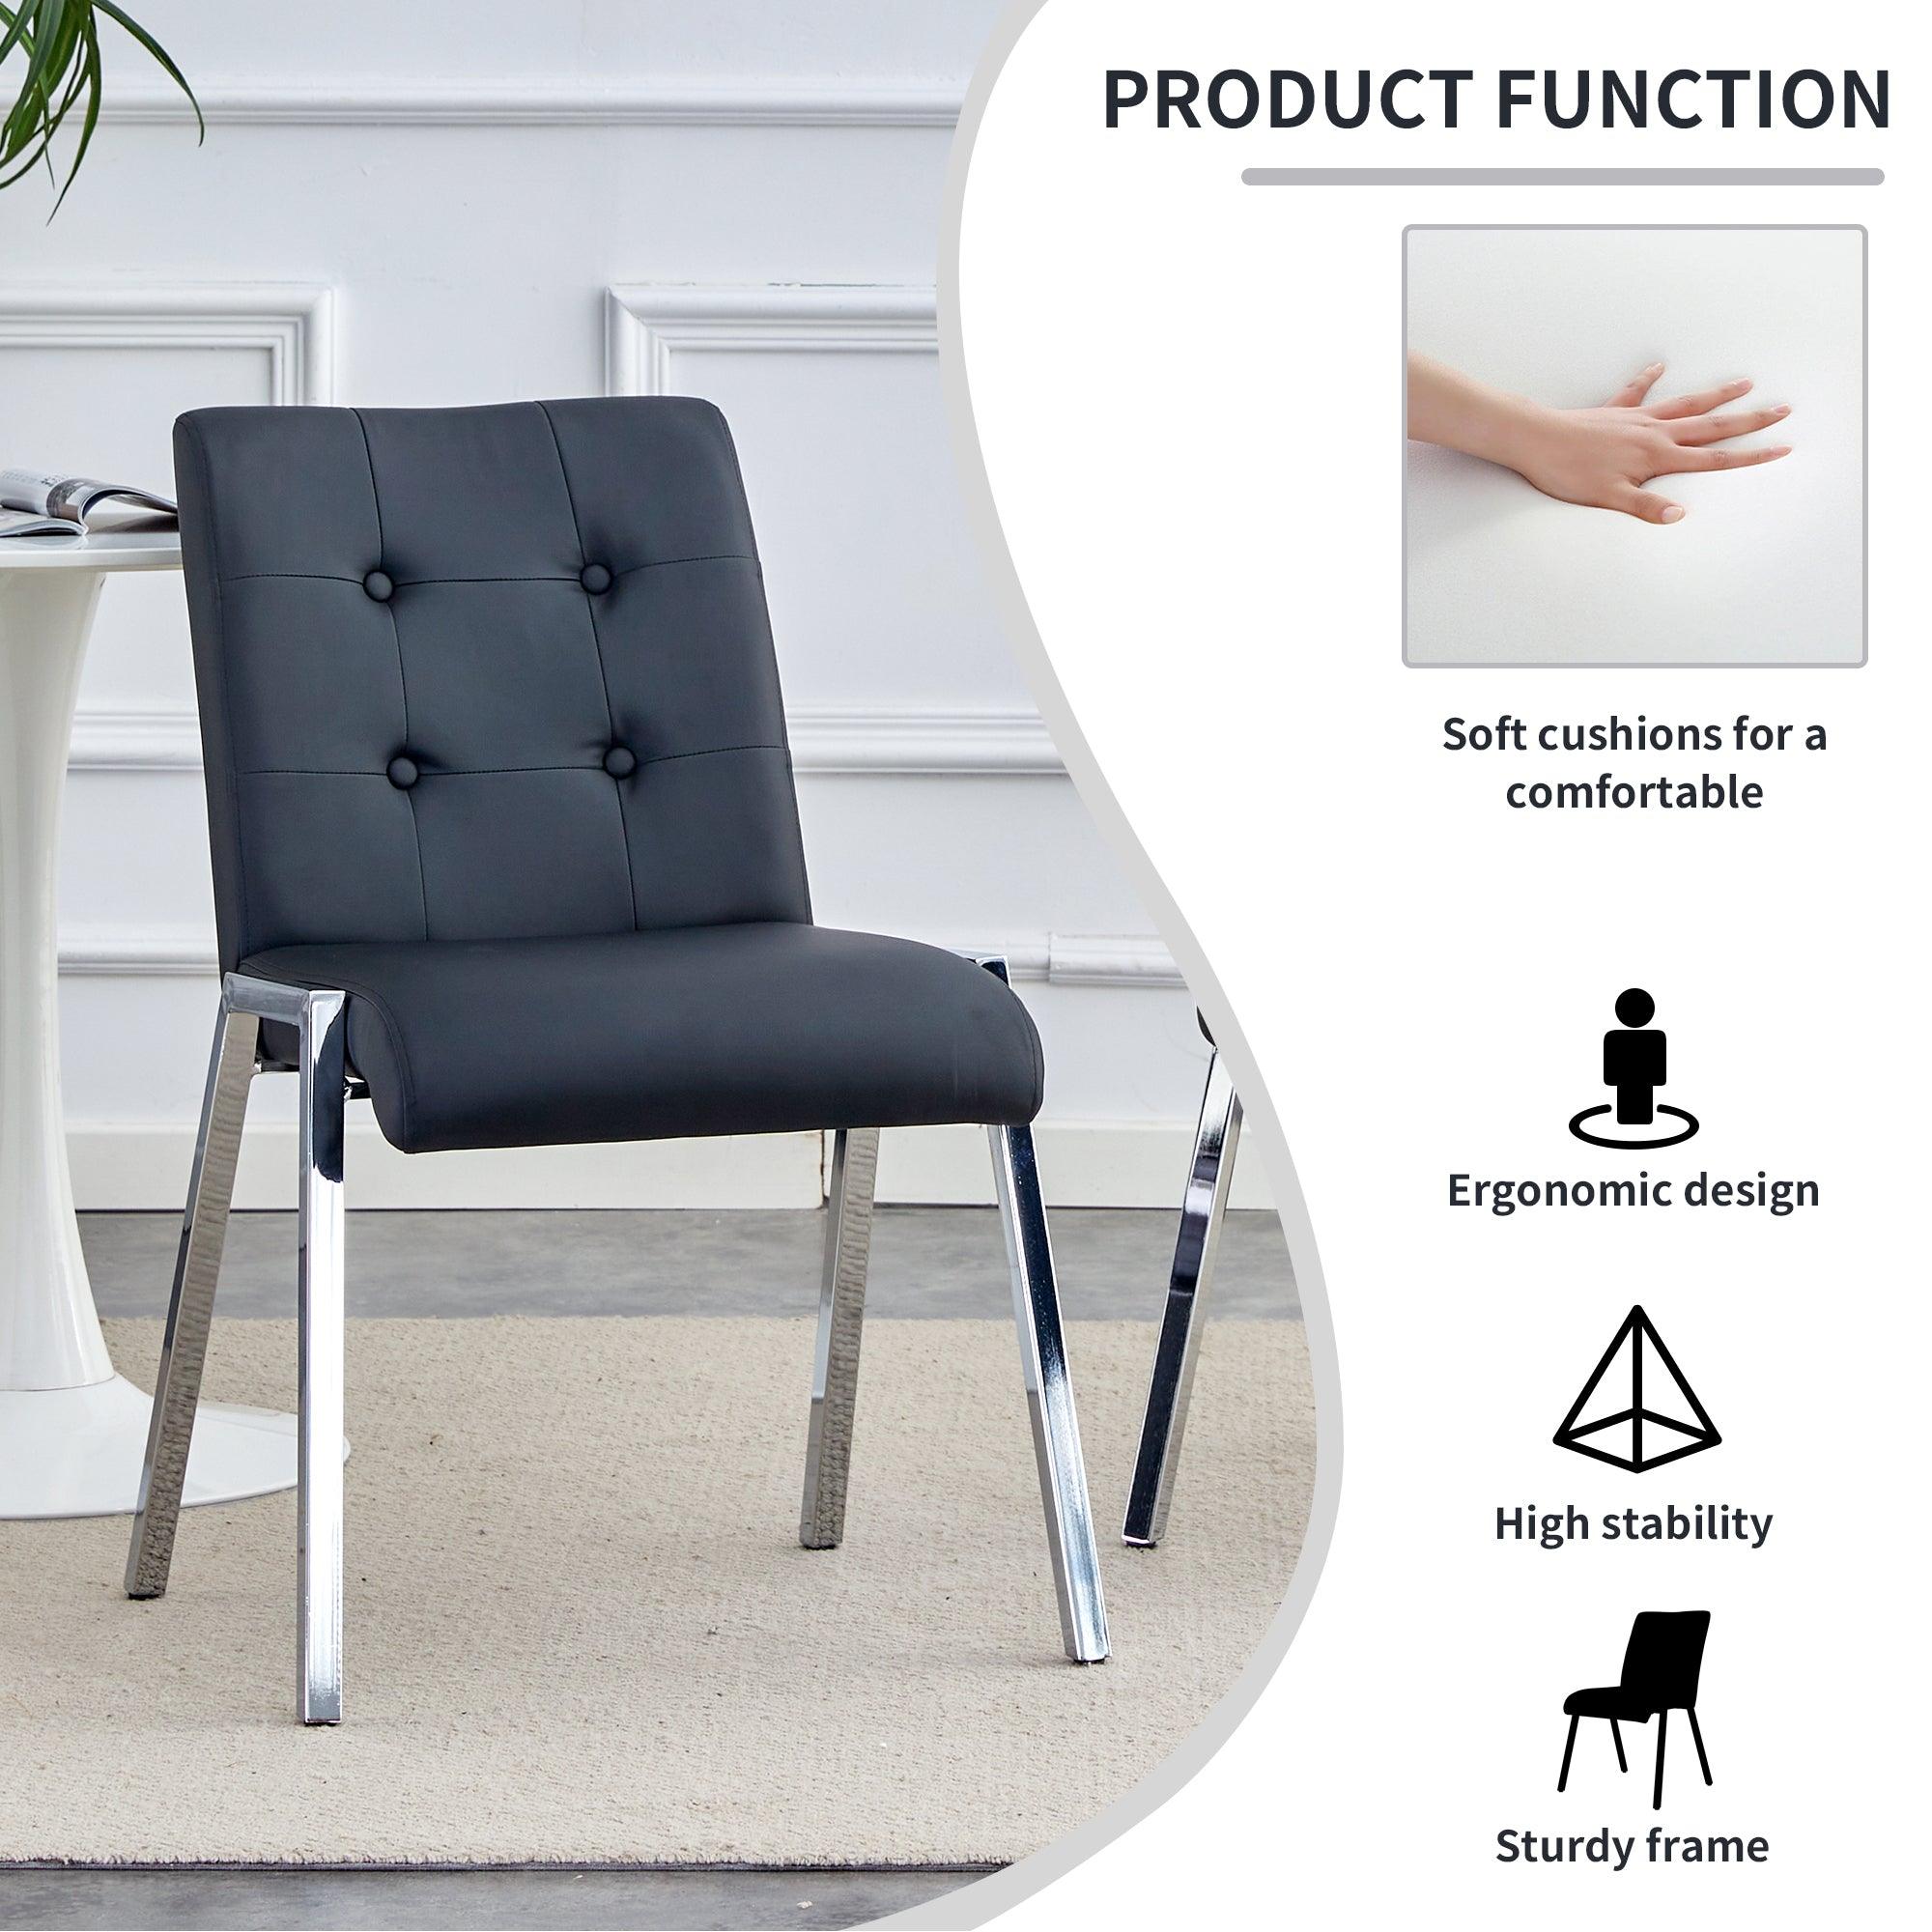 Grid armless high backrest dining chair, electroplated metal legs, black 2-piece set, office chair. Suitable for restaurants, living rooms, kitchens, and offices.